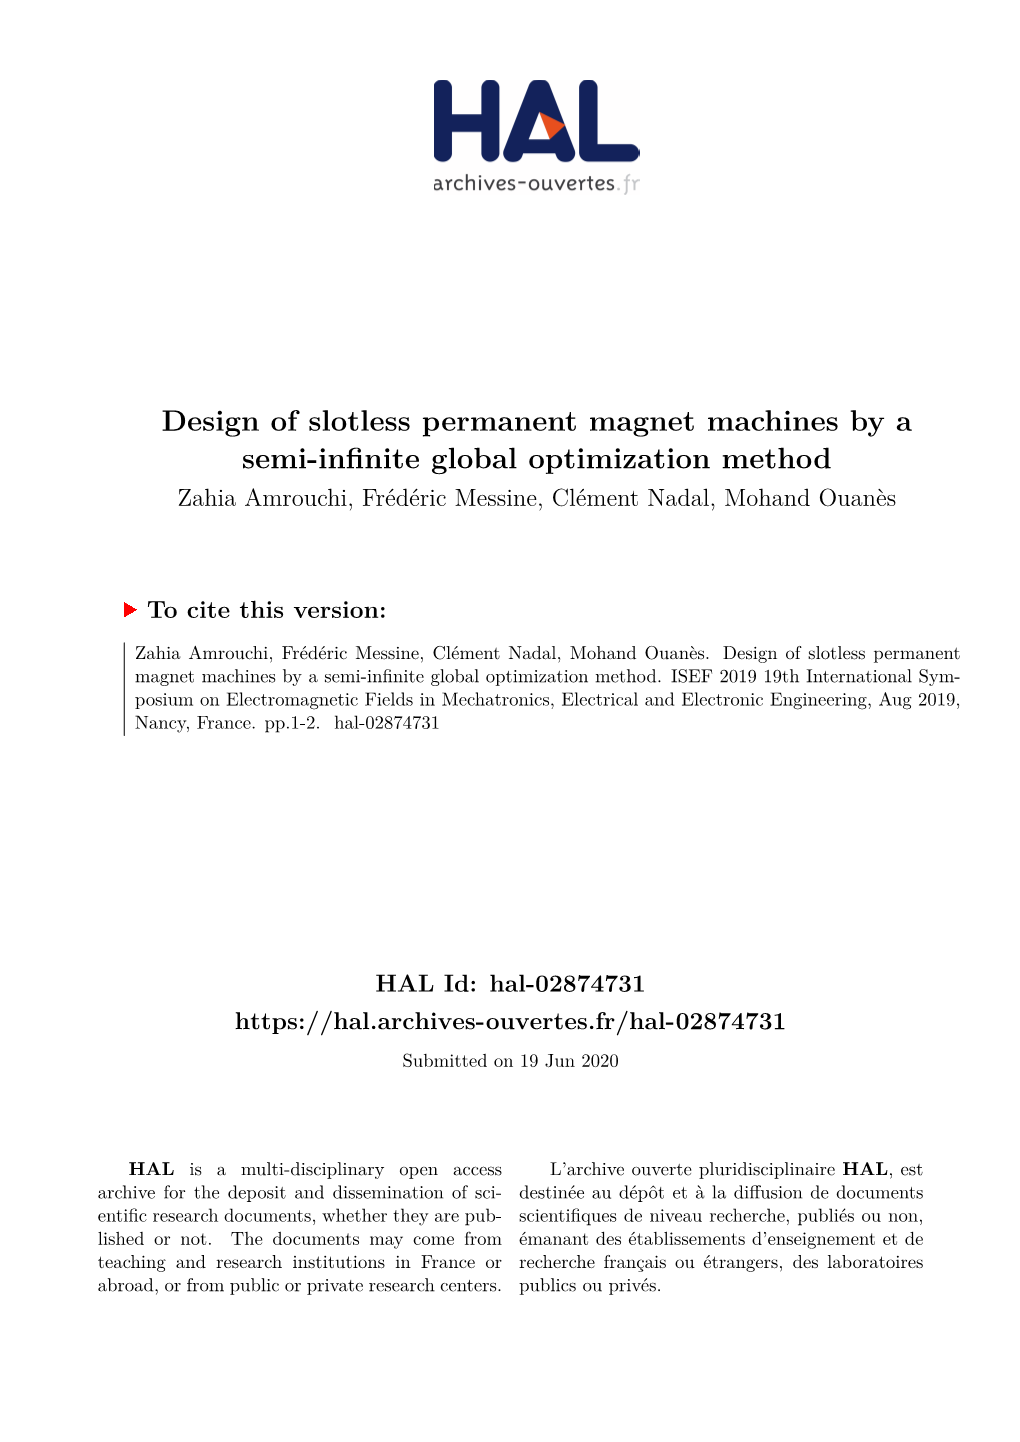 Design of Slotless Permanent Magnet Machines by a Semi-Infinite Global Optimization Method Zahia Amrouchi, Frédéric Messine, Clément Nadal, Mohand Ouanès